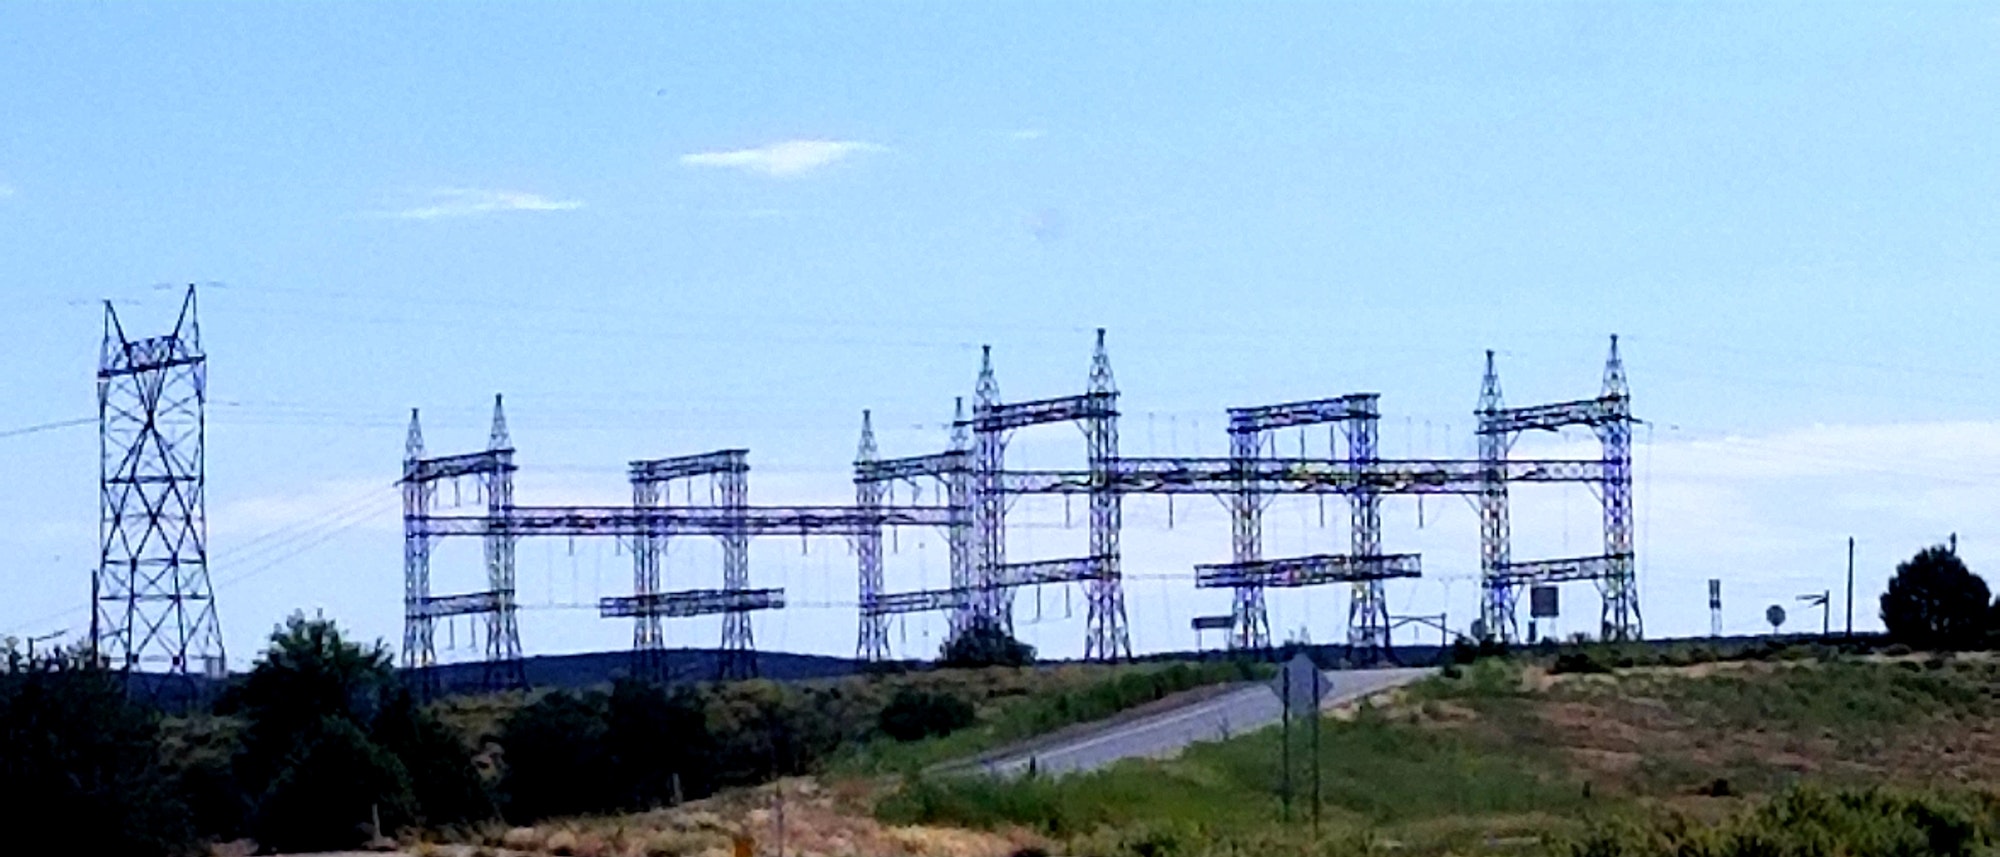 POWER! Electrical power lines and towers at a power plant!